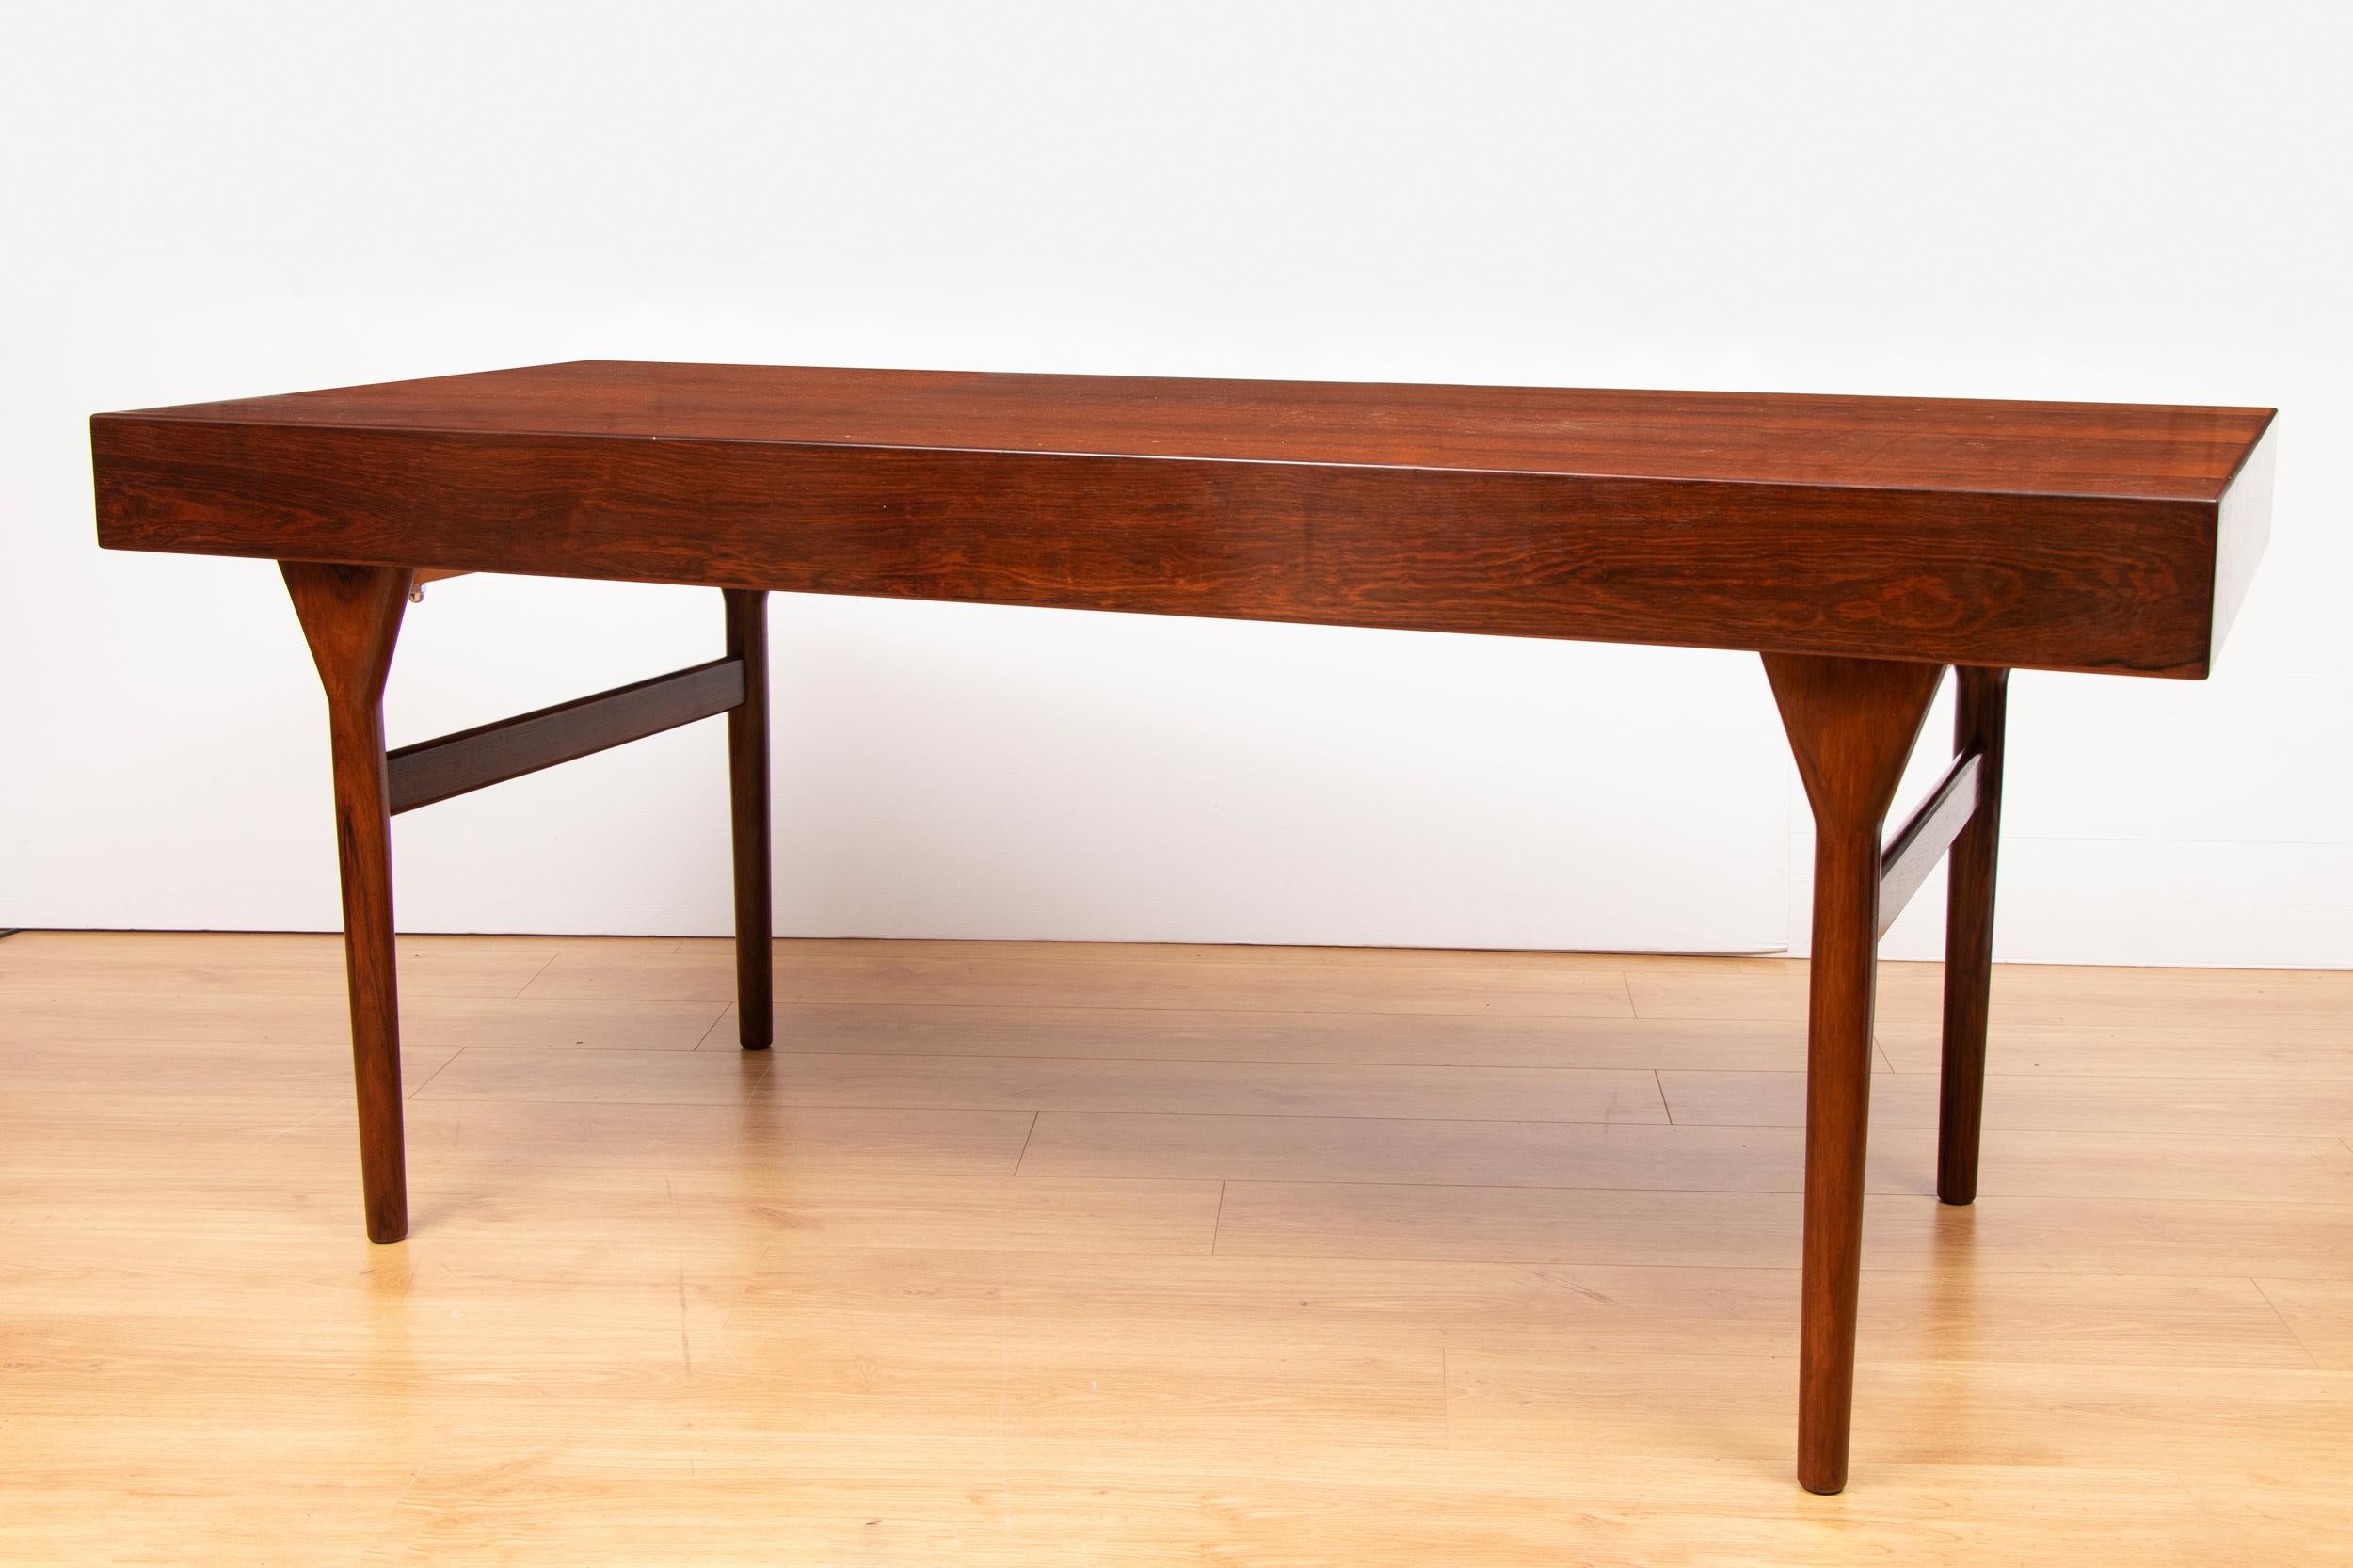 Very elegant Nanna Ditzel rosewood desk designed in the 1960s and manufactured by Soren Willadsen Mobelfabrik in Denmark. Rare timeless piece with four drawers standing on slender legs.
Rarer four drawer model number 93-4.